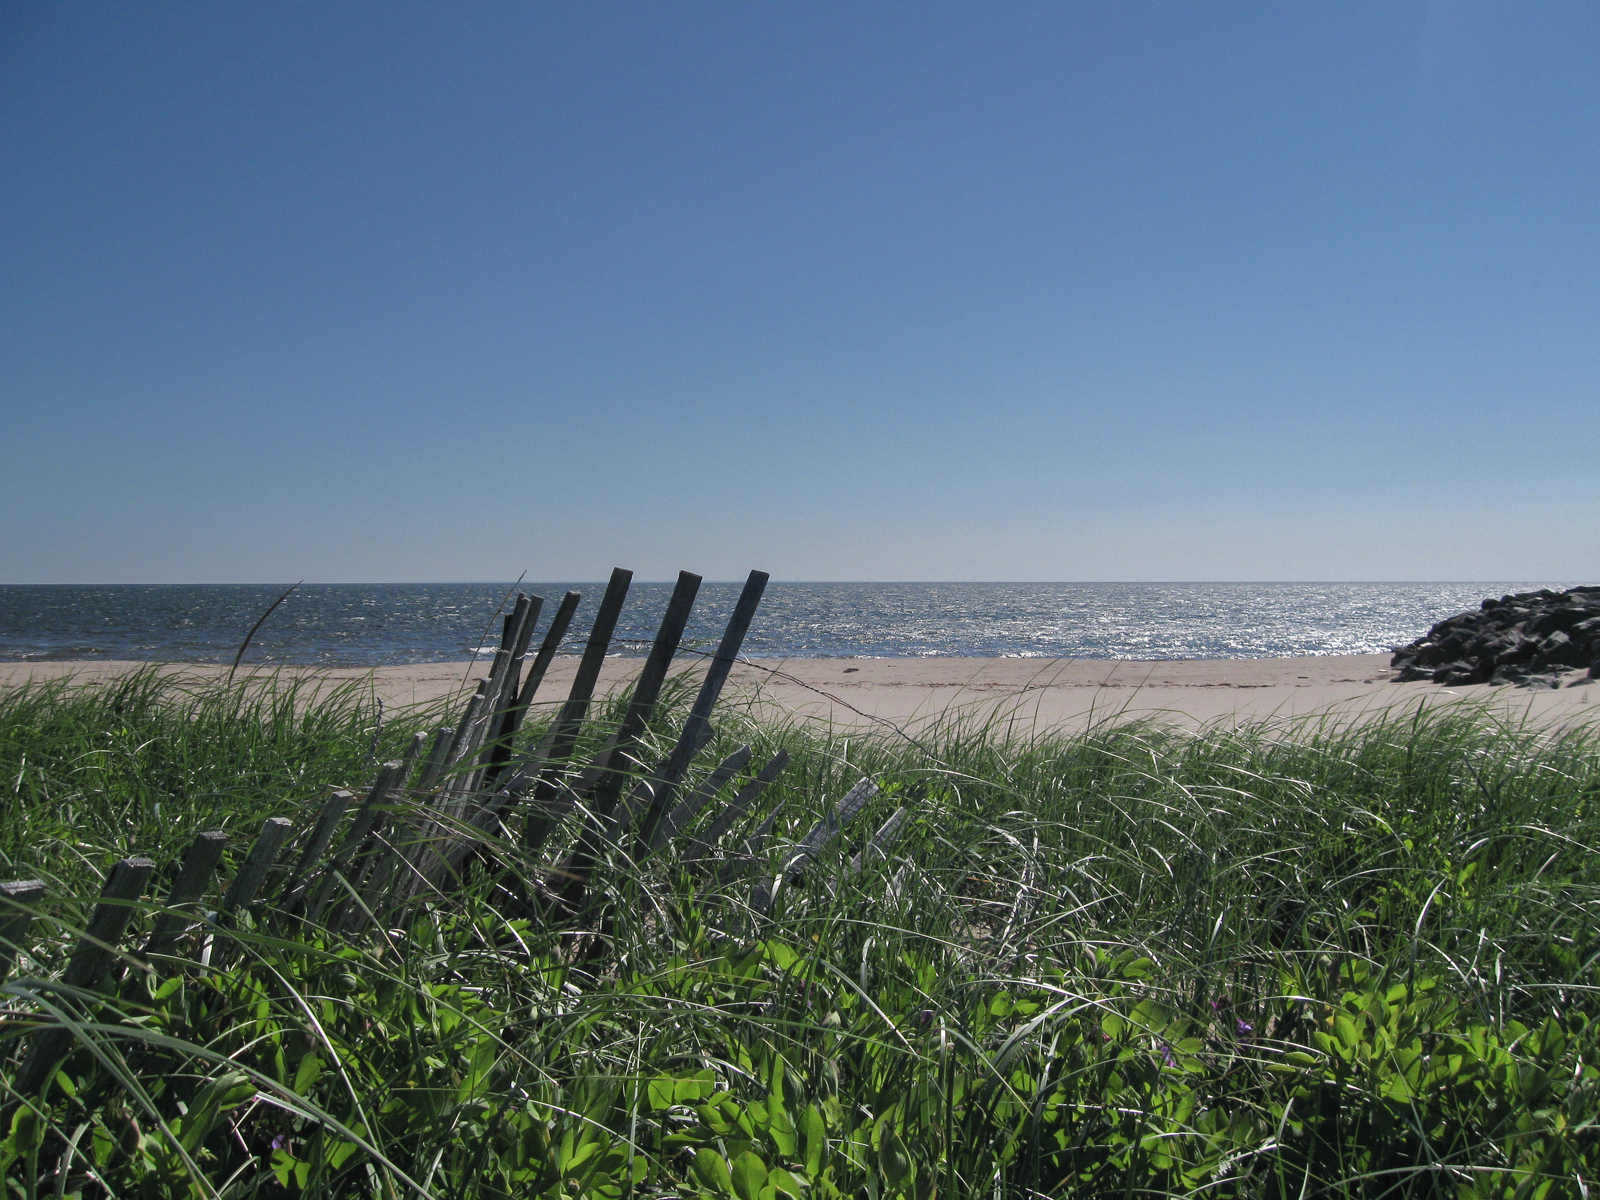 beach scene with snow fence and beach grass in foreground